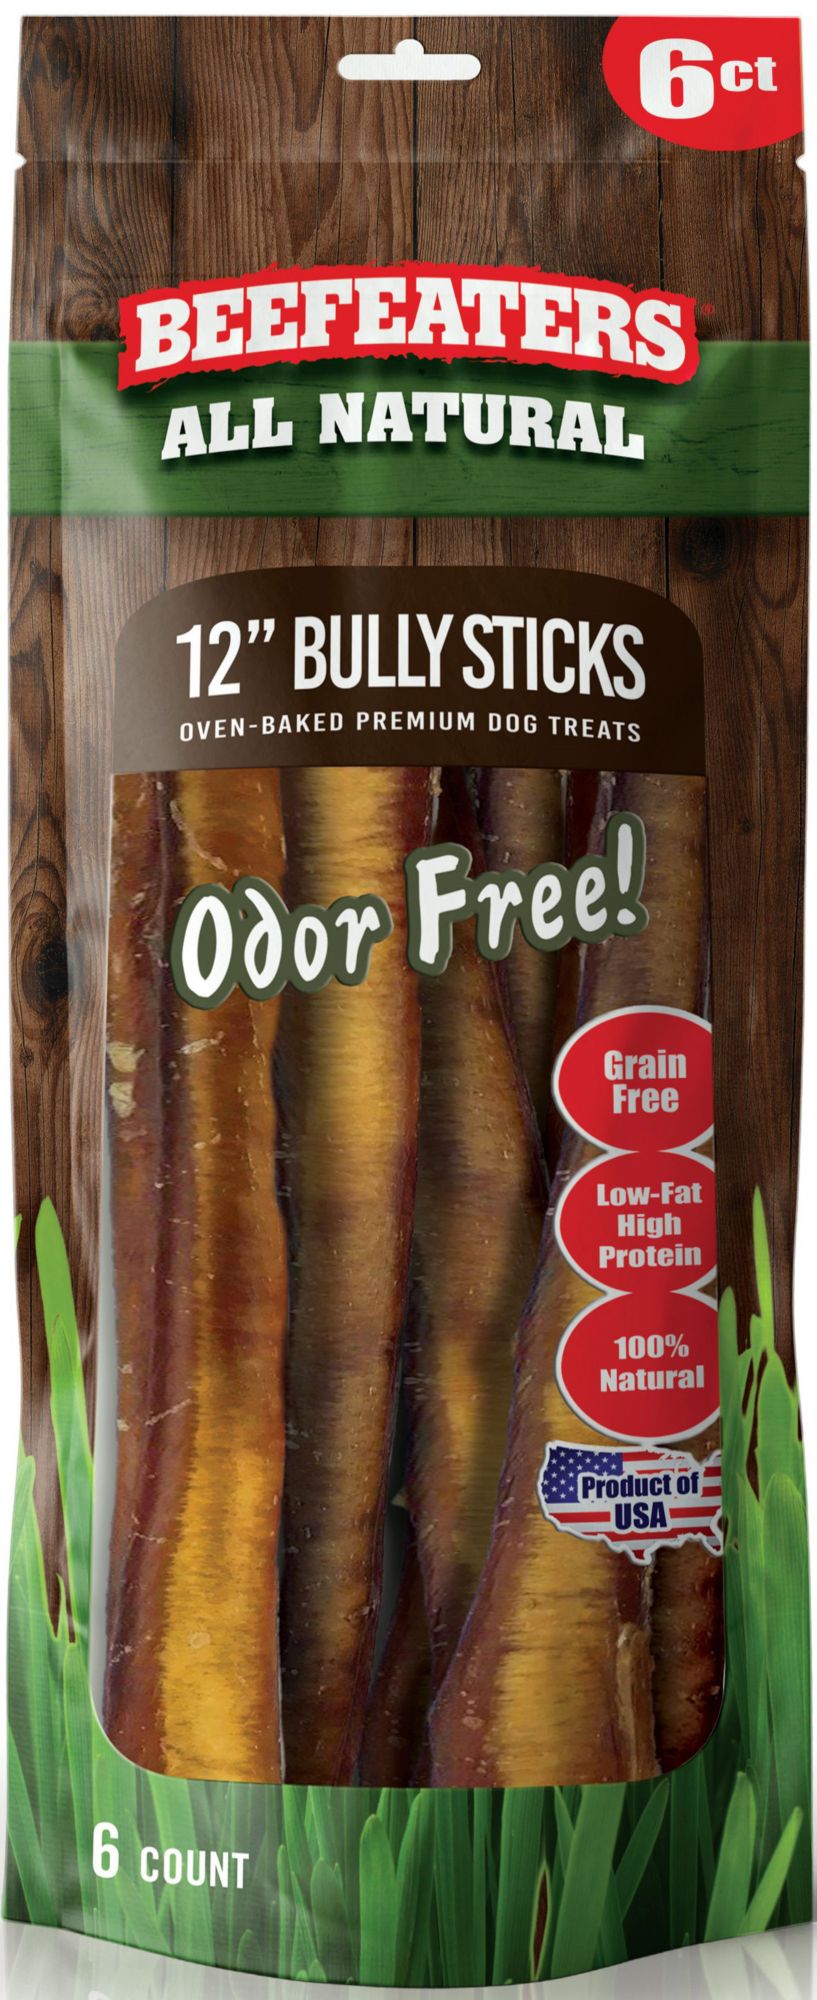 Beefeaters No Odor Natural Bully Sticks, 6 ct.